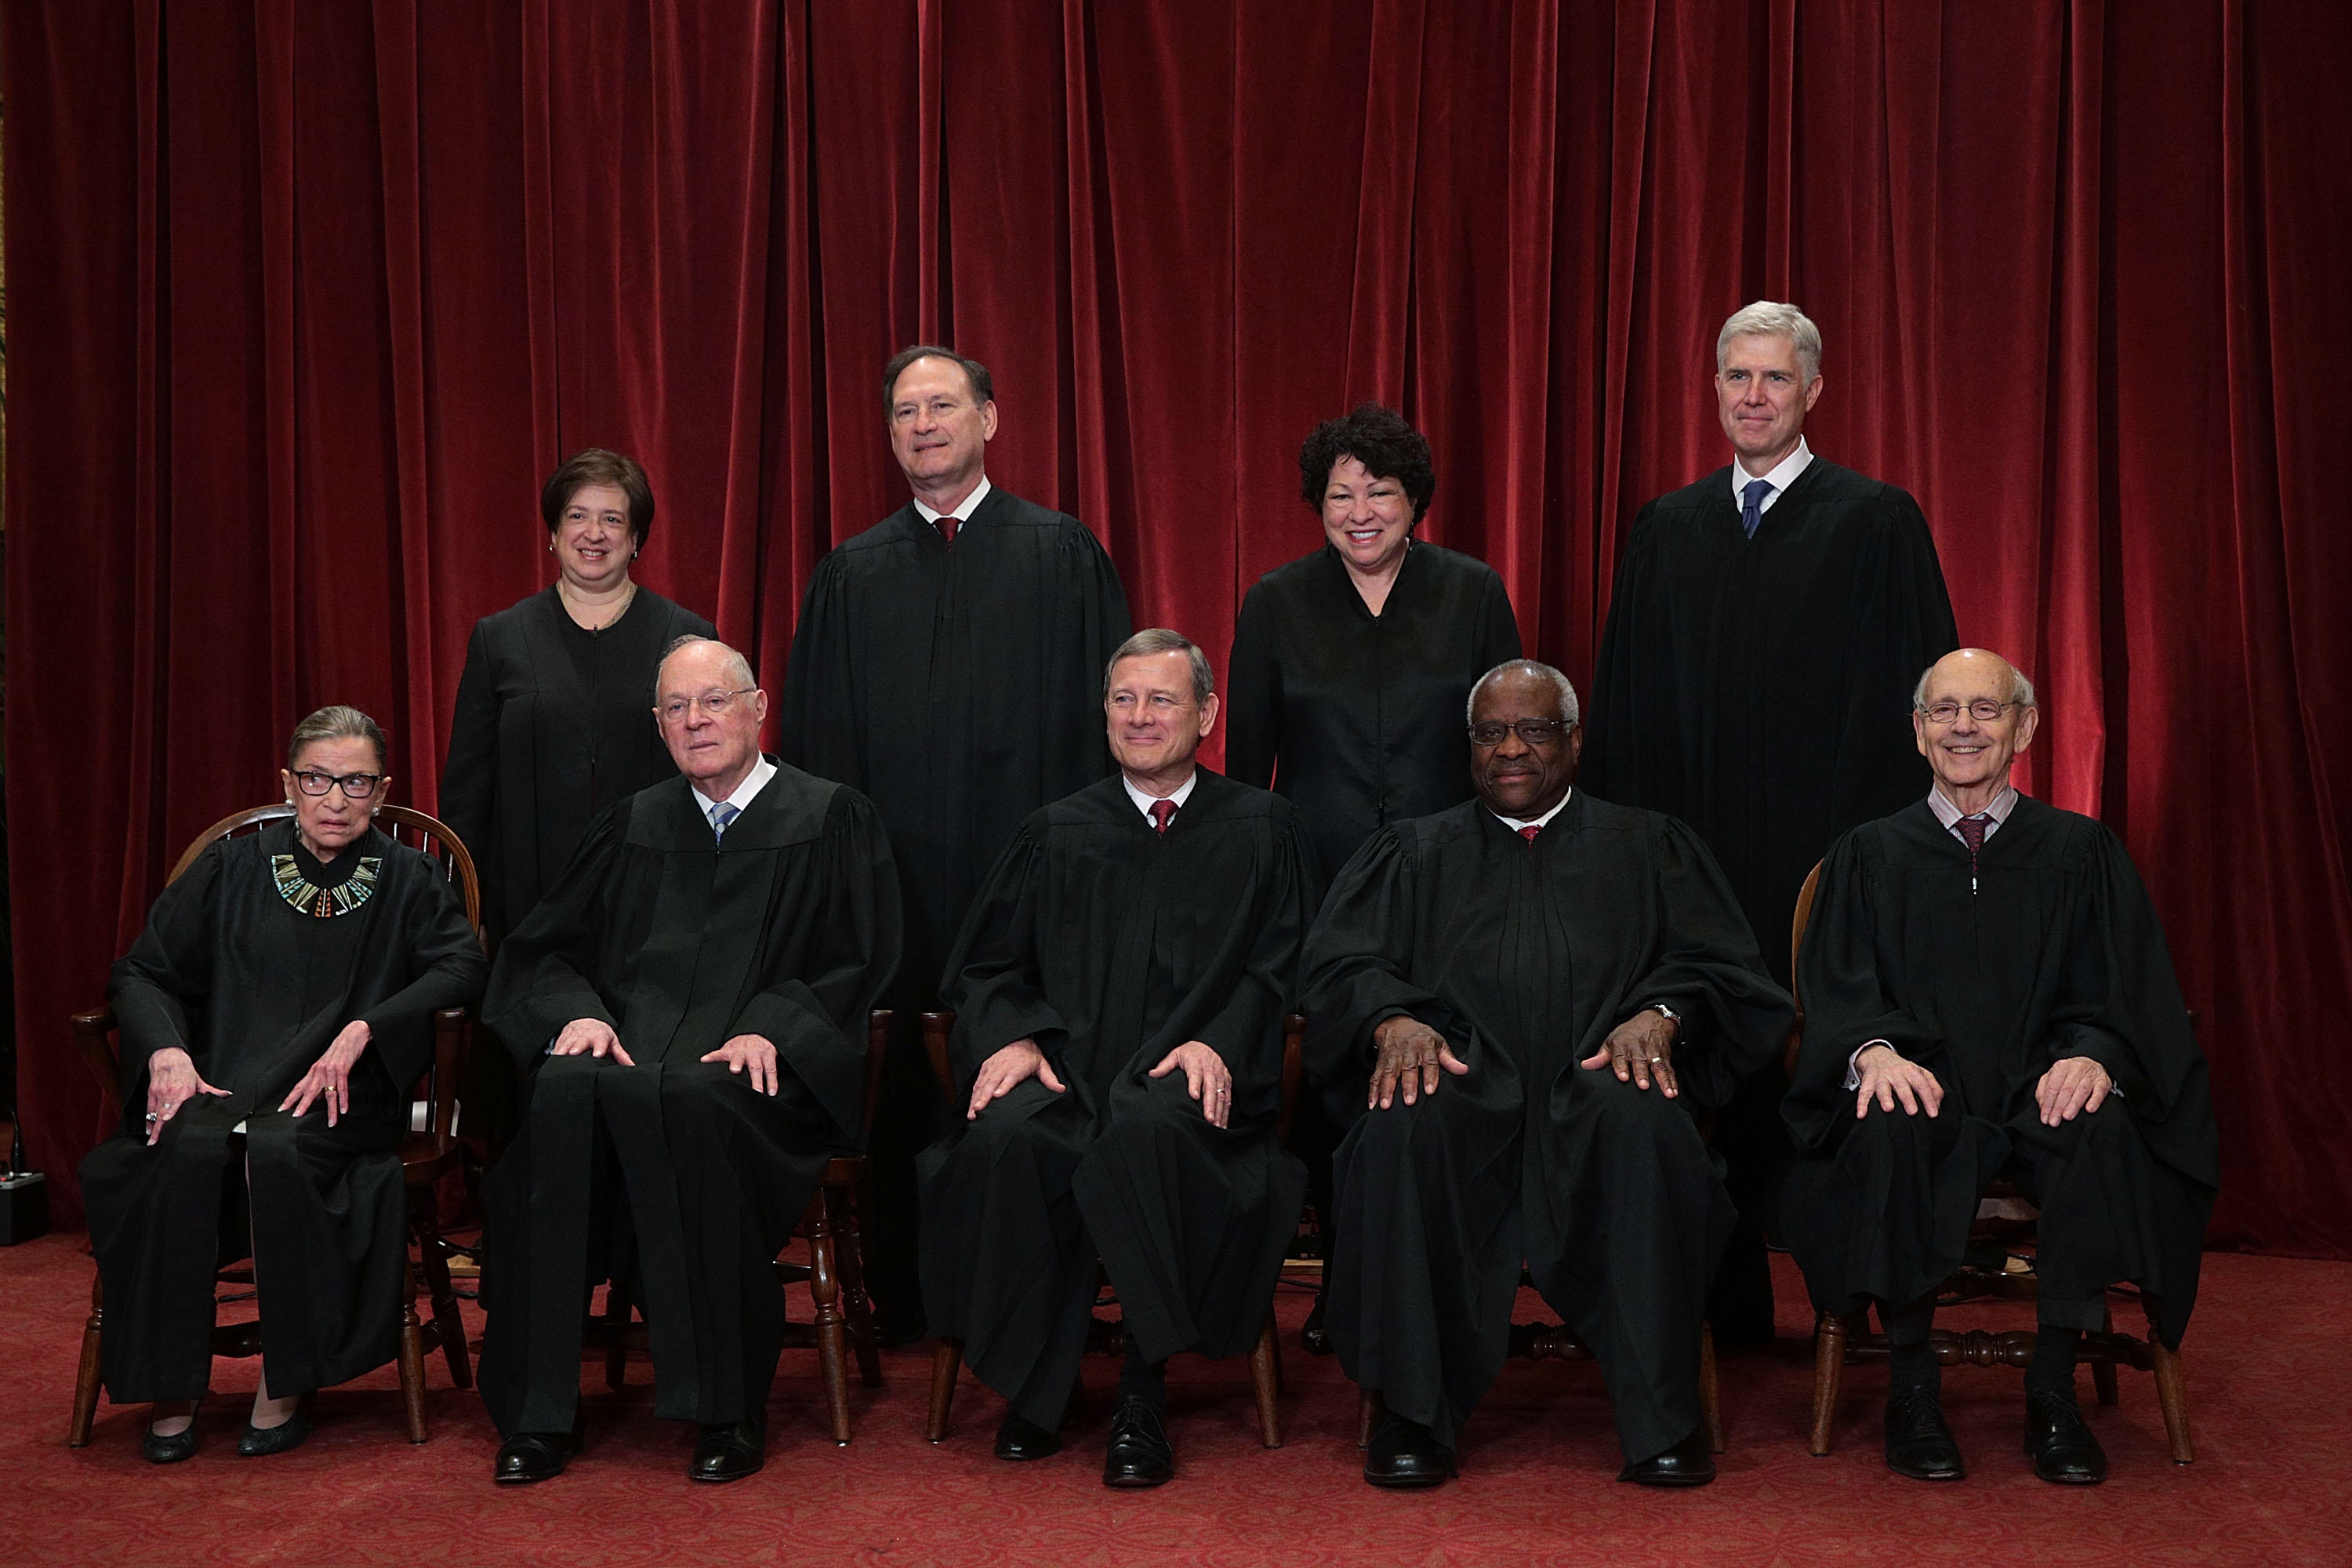 Commentary: Is it time for term limits on the Supreme Court? CBS News